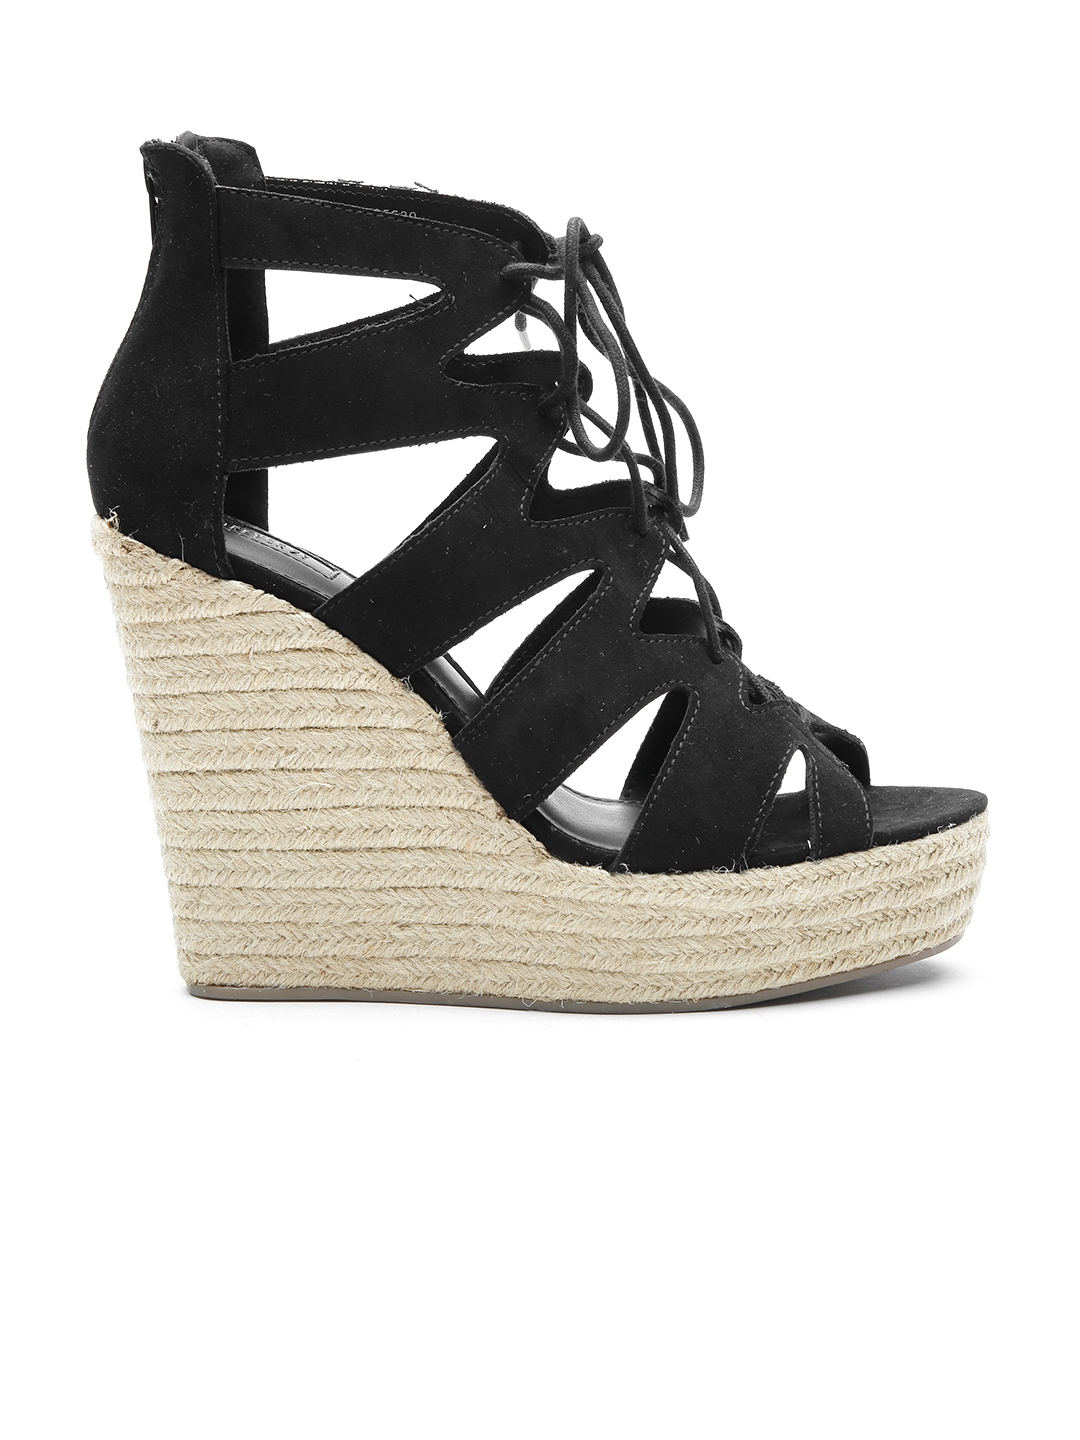 forever 21 wedge sneakers